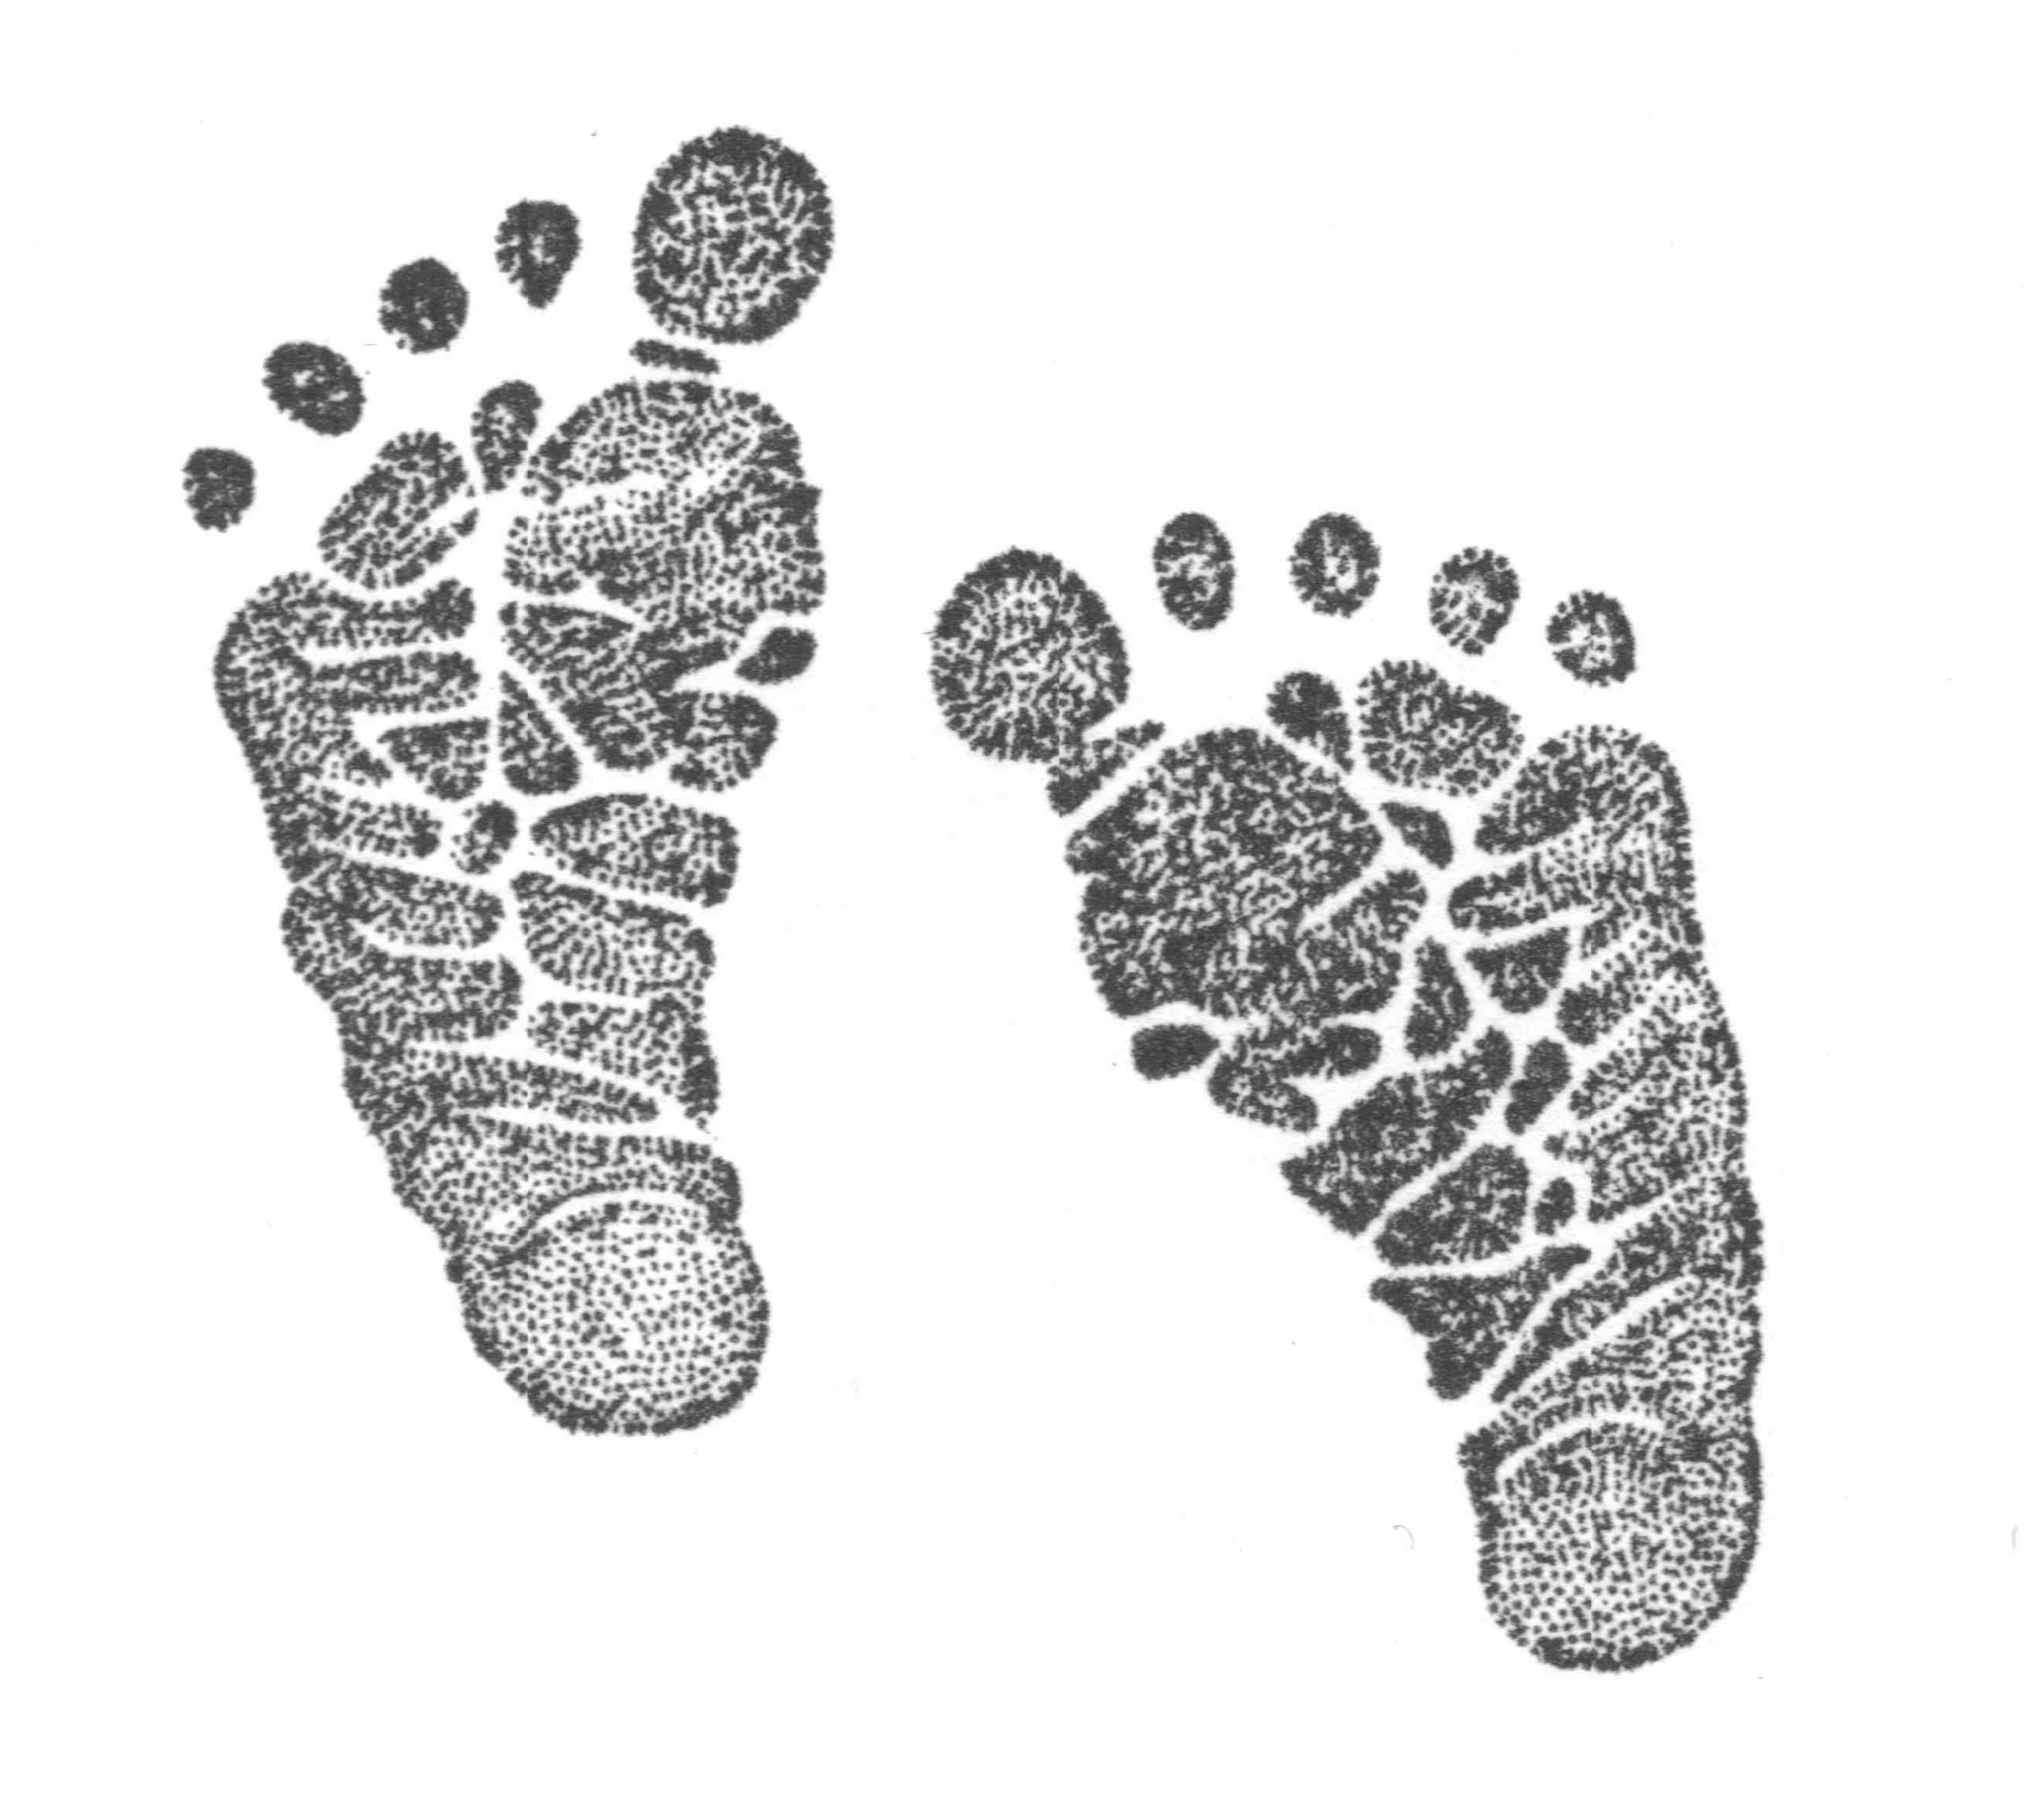 Baby Footprint Template Printable Clipart Free To Use Clip Art | The ...